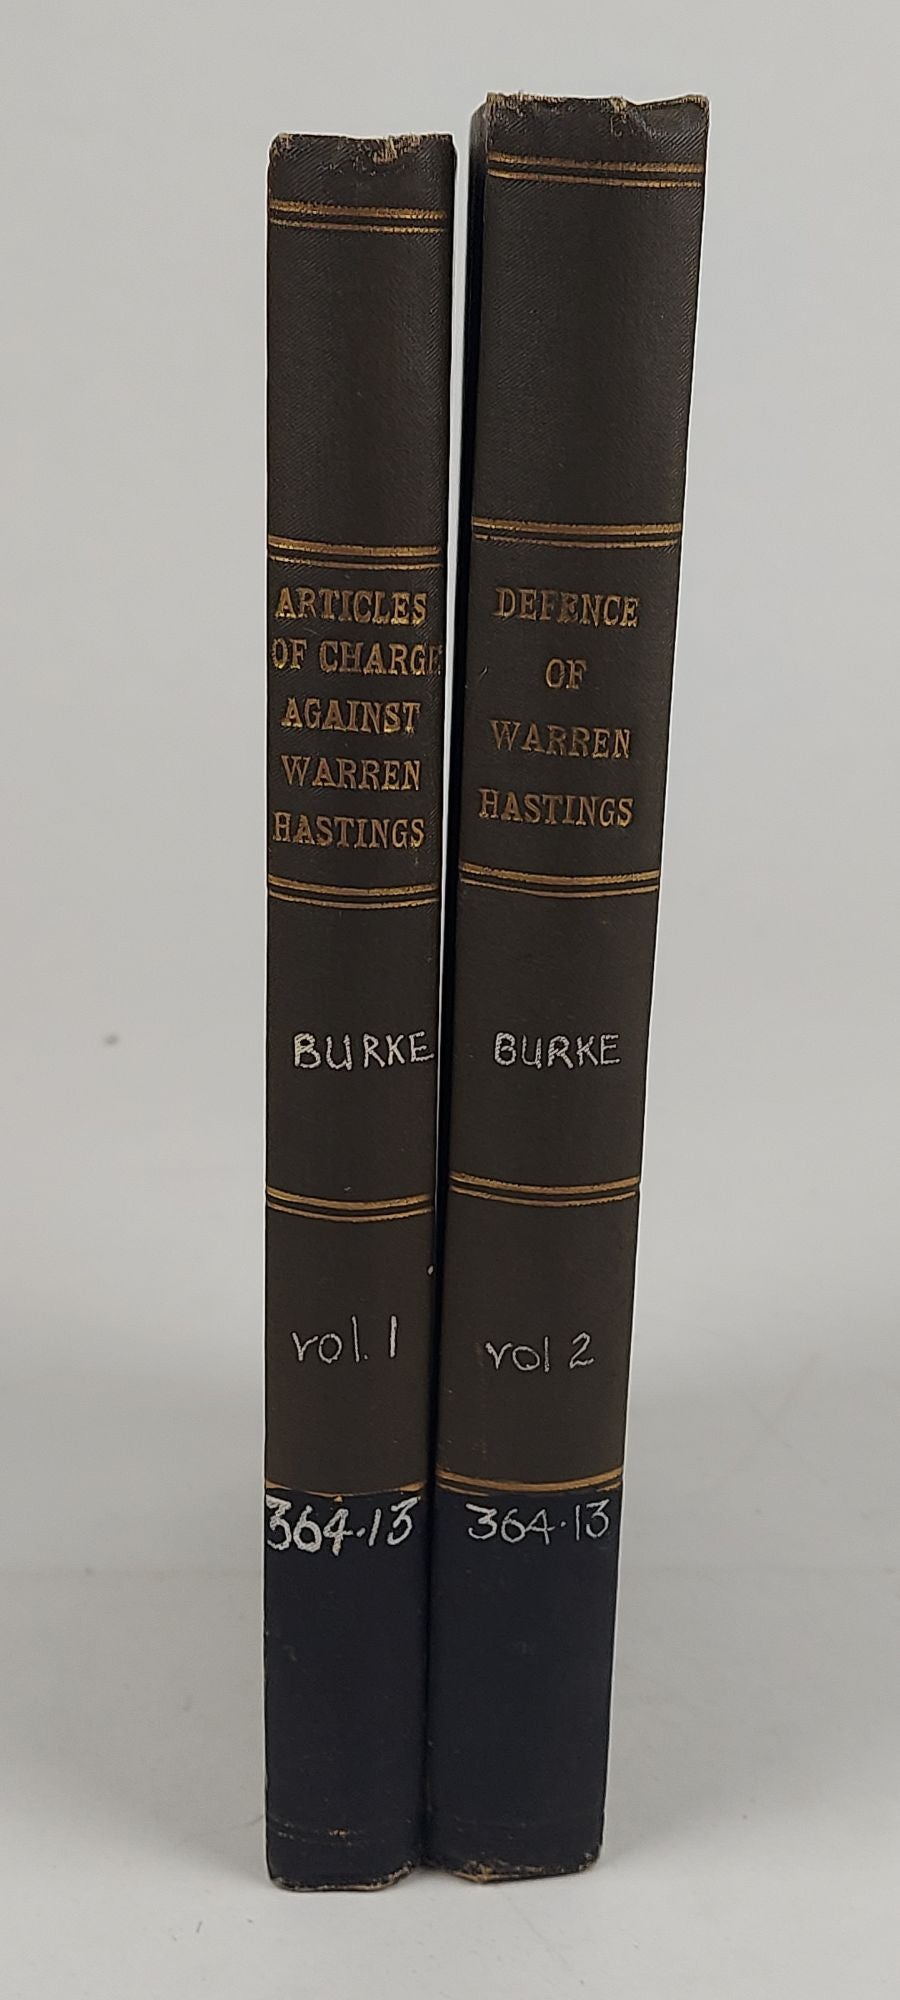 1363043 ARTICLES OF CHARGES OF HIGH CRIMES AND MISDEMEANORS AGAINST WARREN HASTINGS, ESQ. & THE DEFENSE OF WARREN HASTINGS, ESQ. [2 VOLUMES]. Edmund Burke.